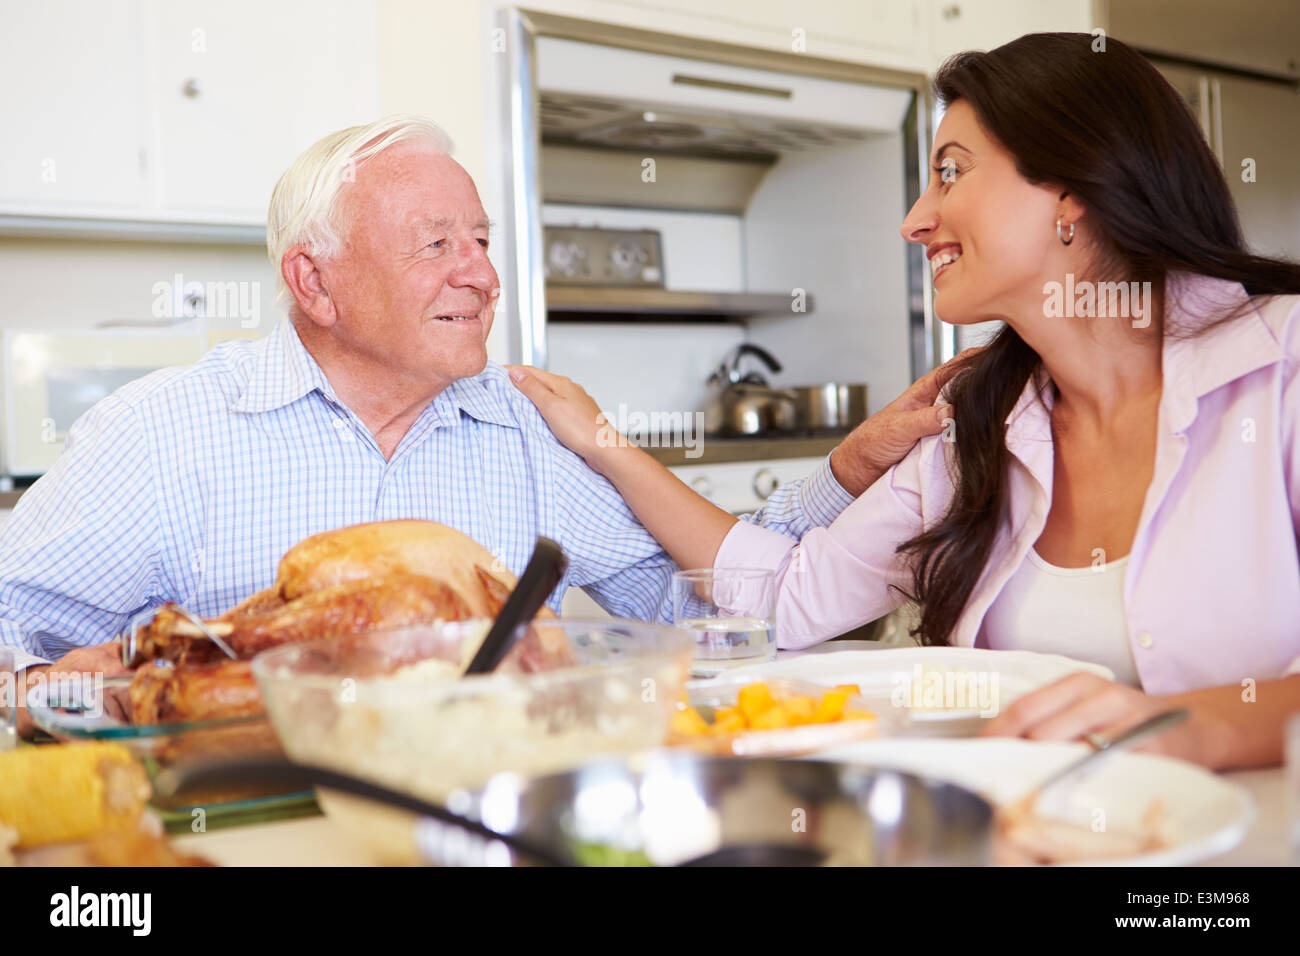 Father And Adult Daughter Having Family Meal At Table Stock Photo